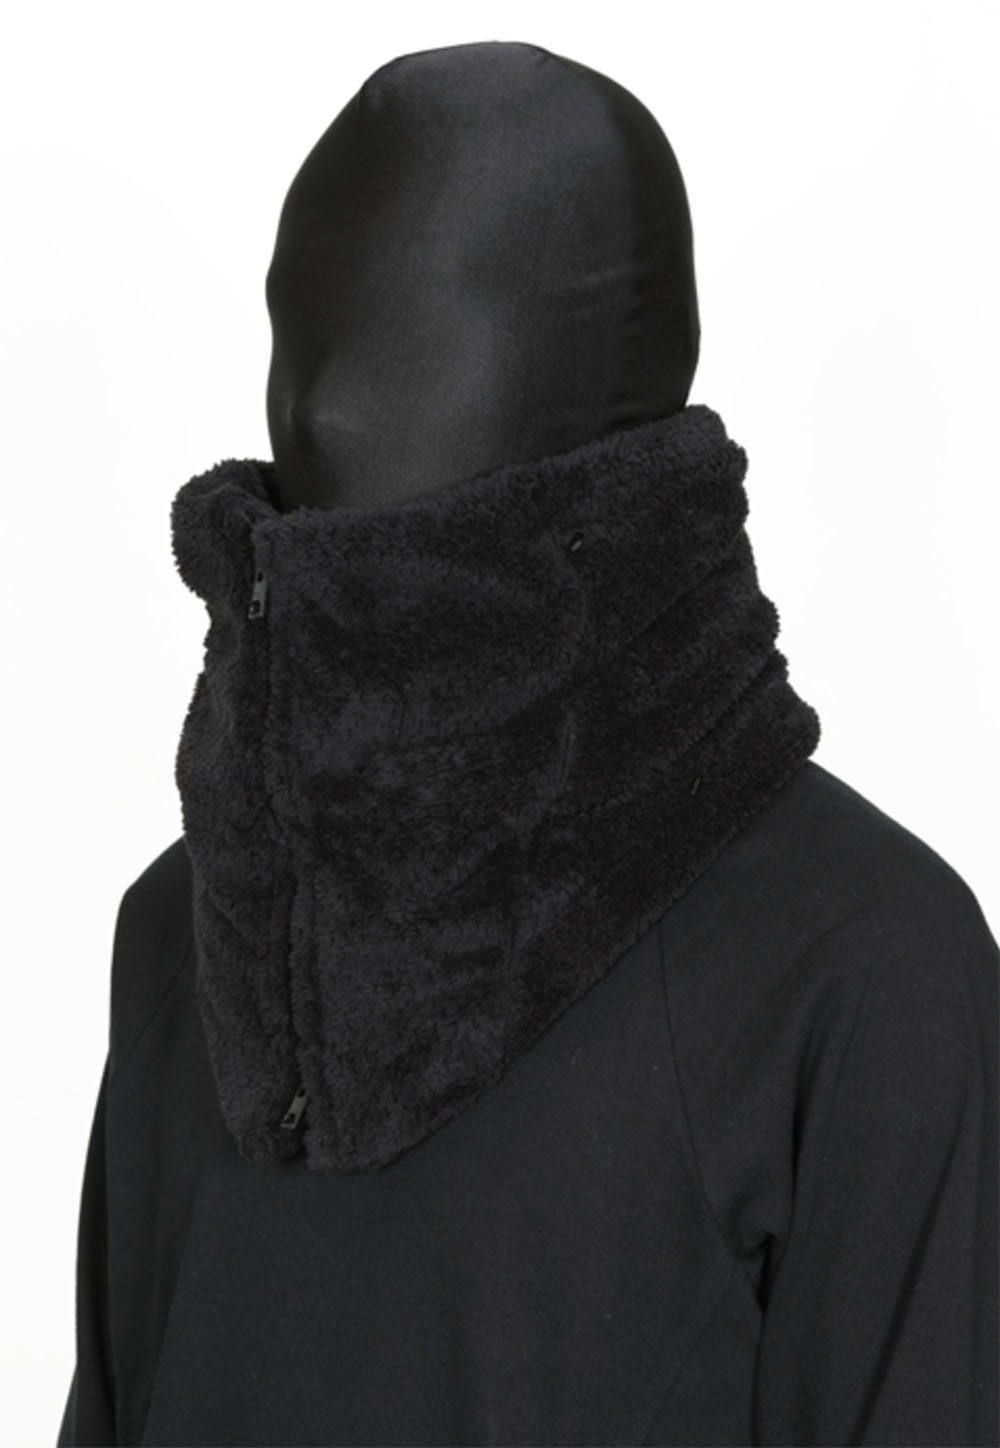 COVERED NECK WARMER.